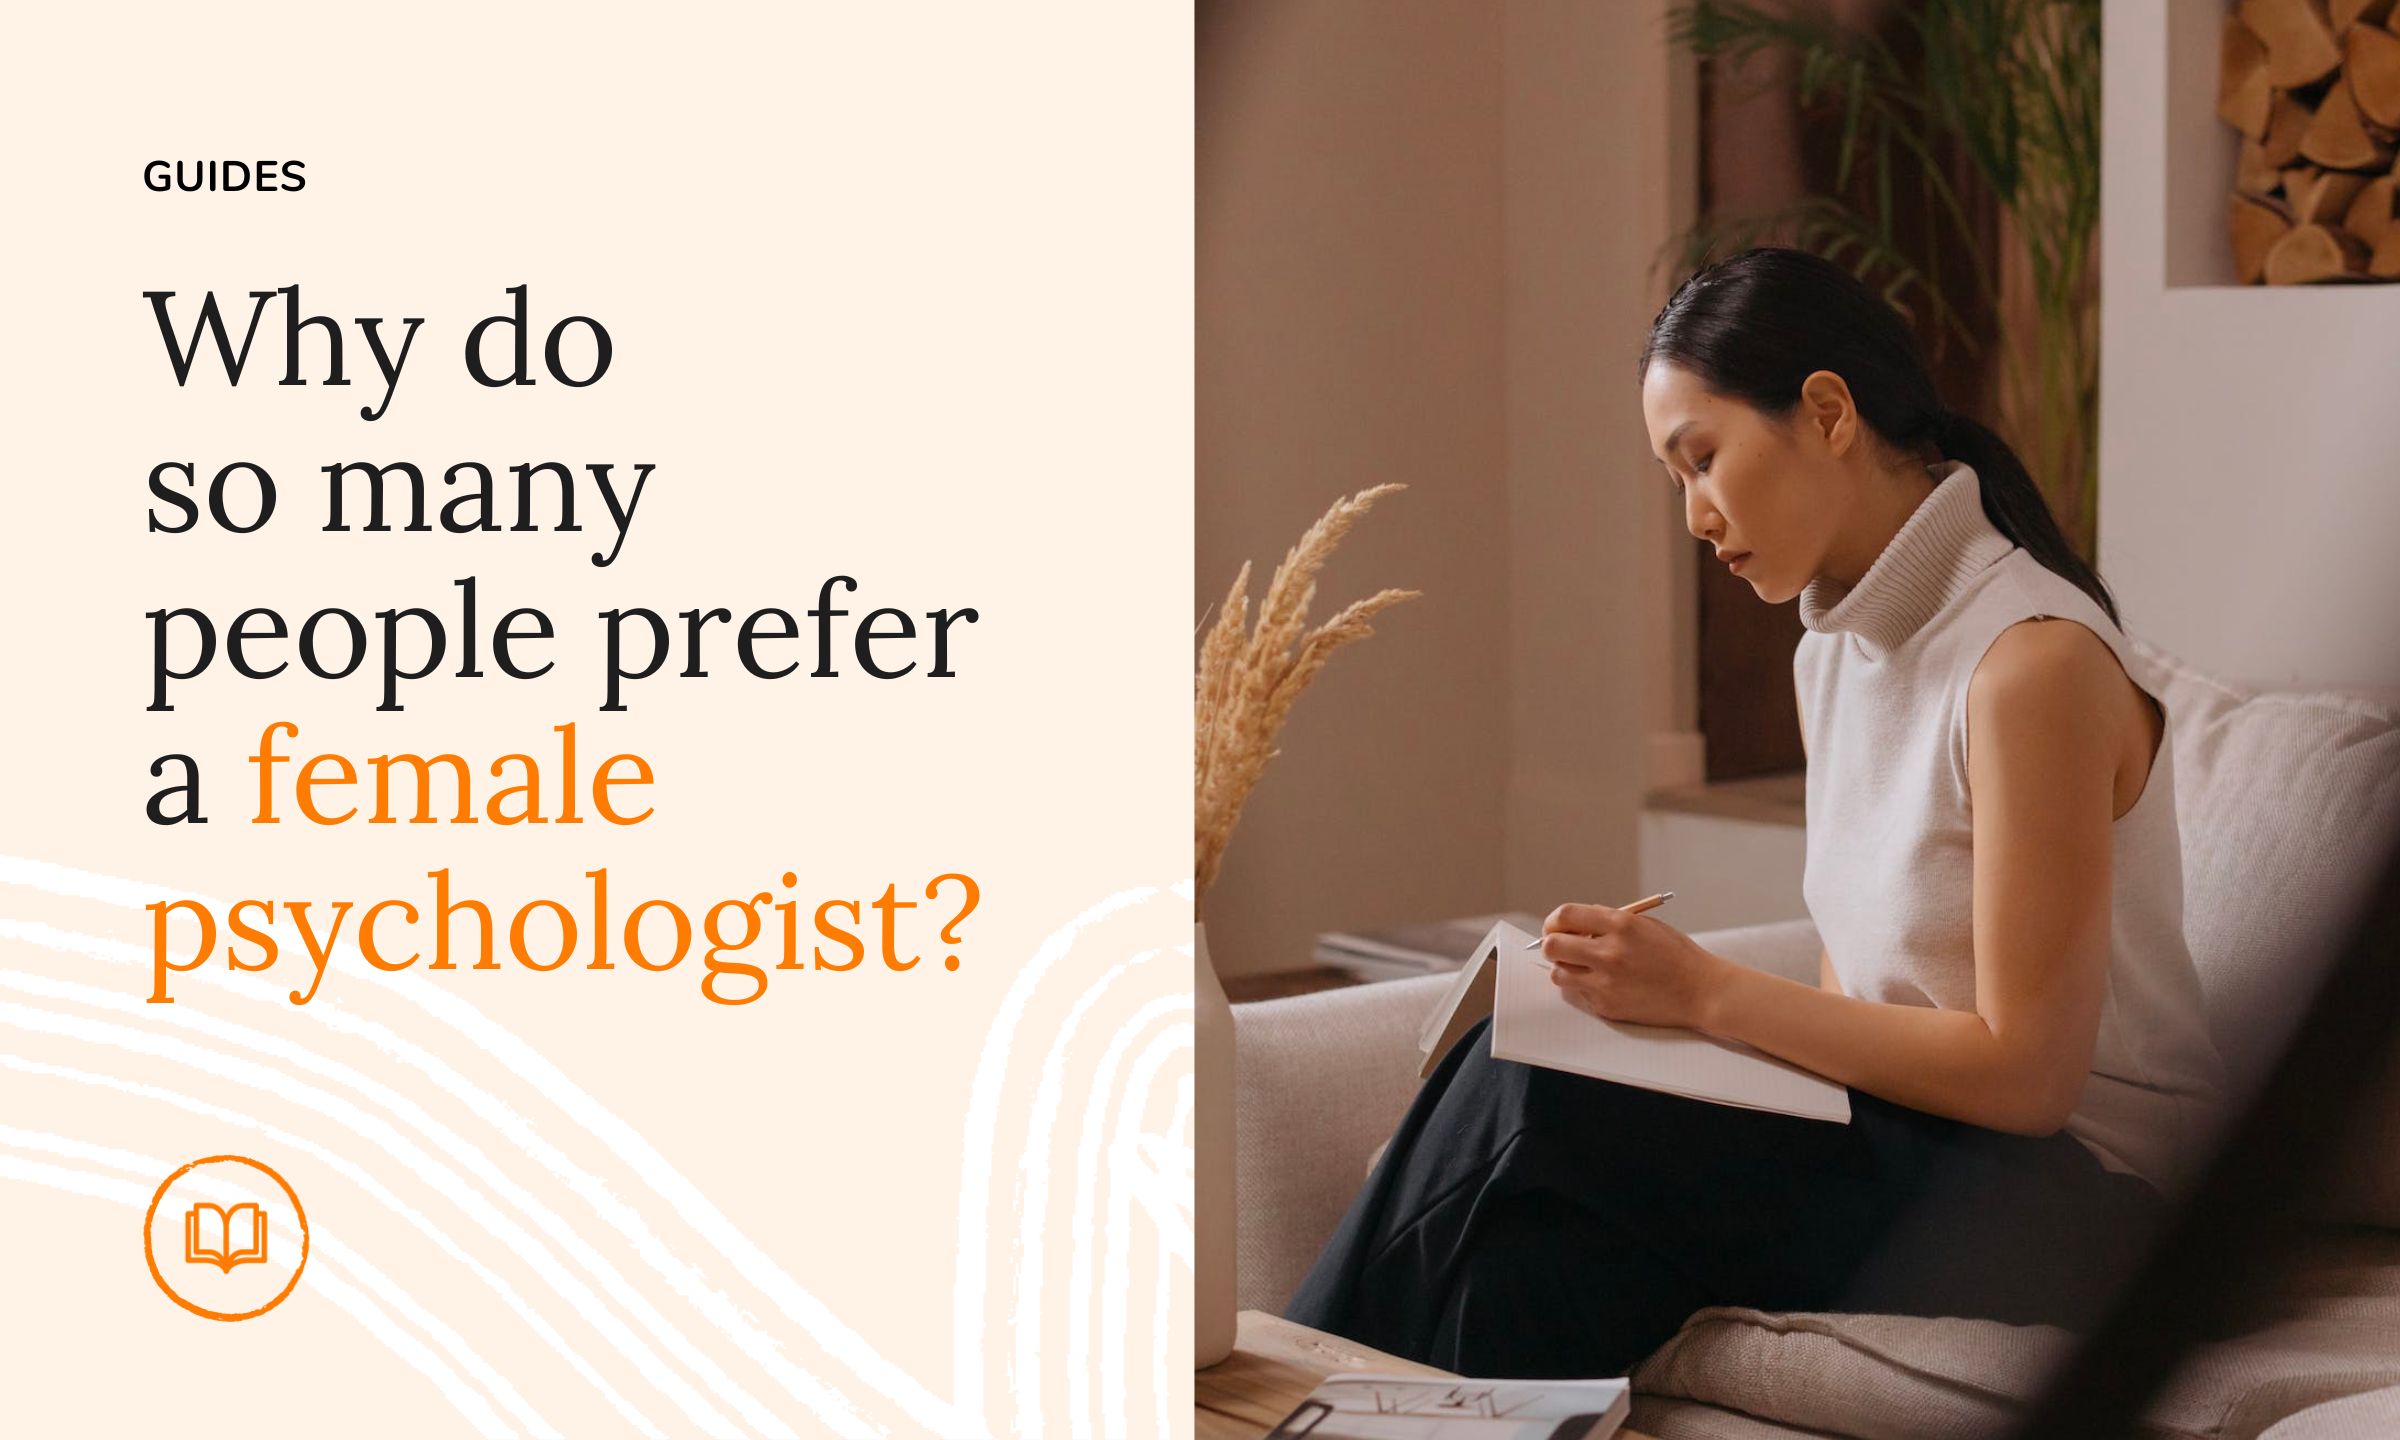 Why Do So Many People Prefer a Female Psychologist?